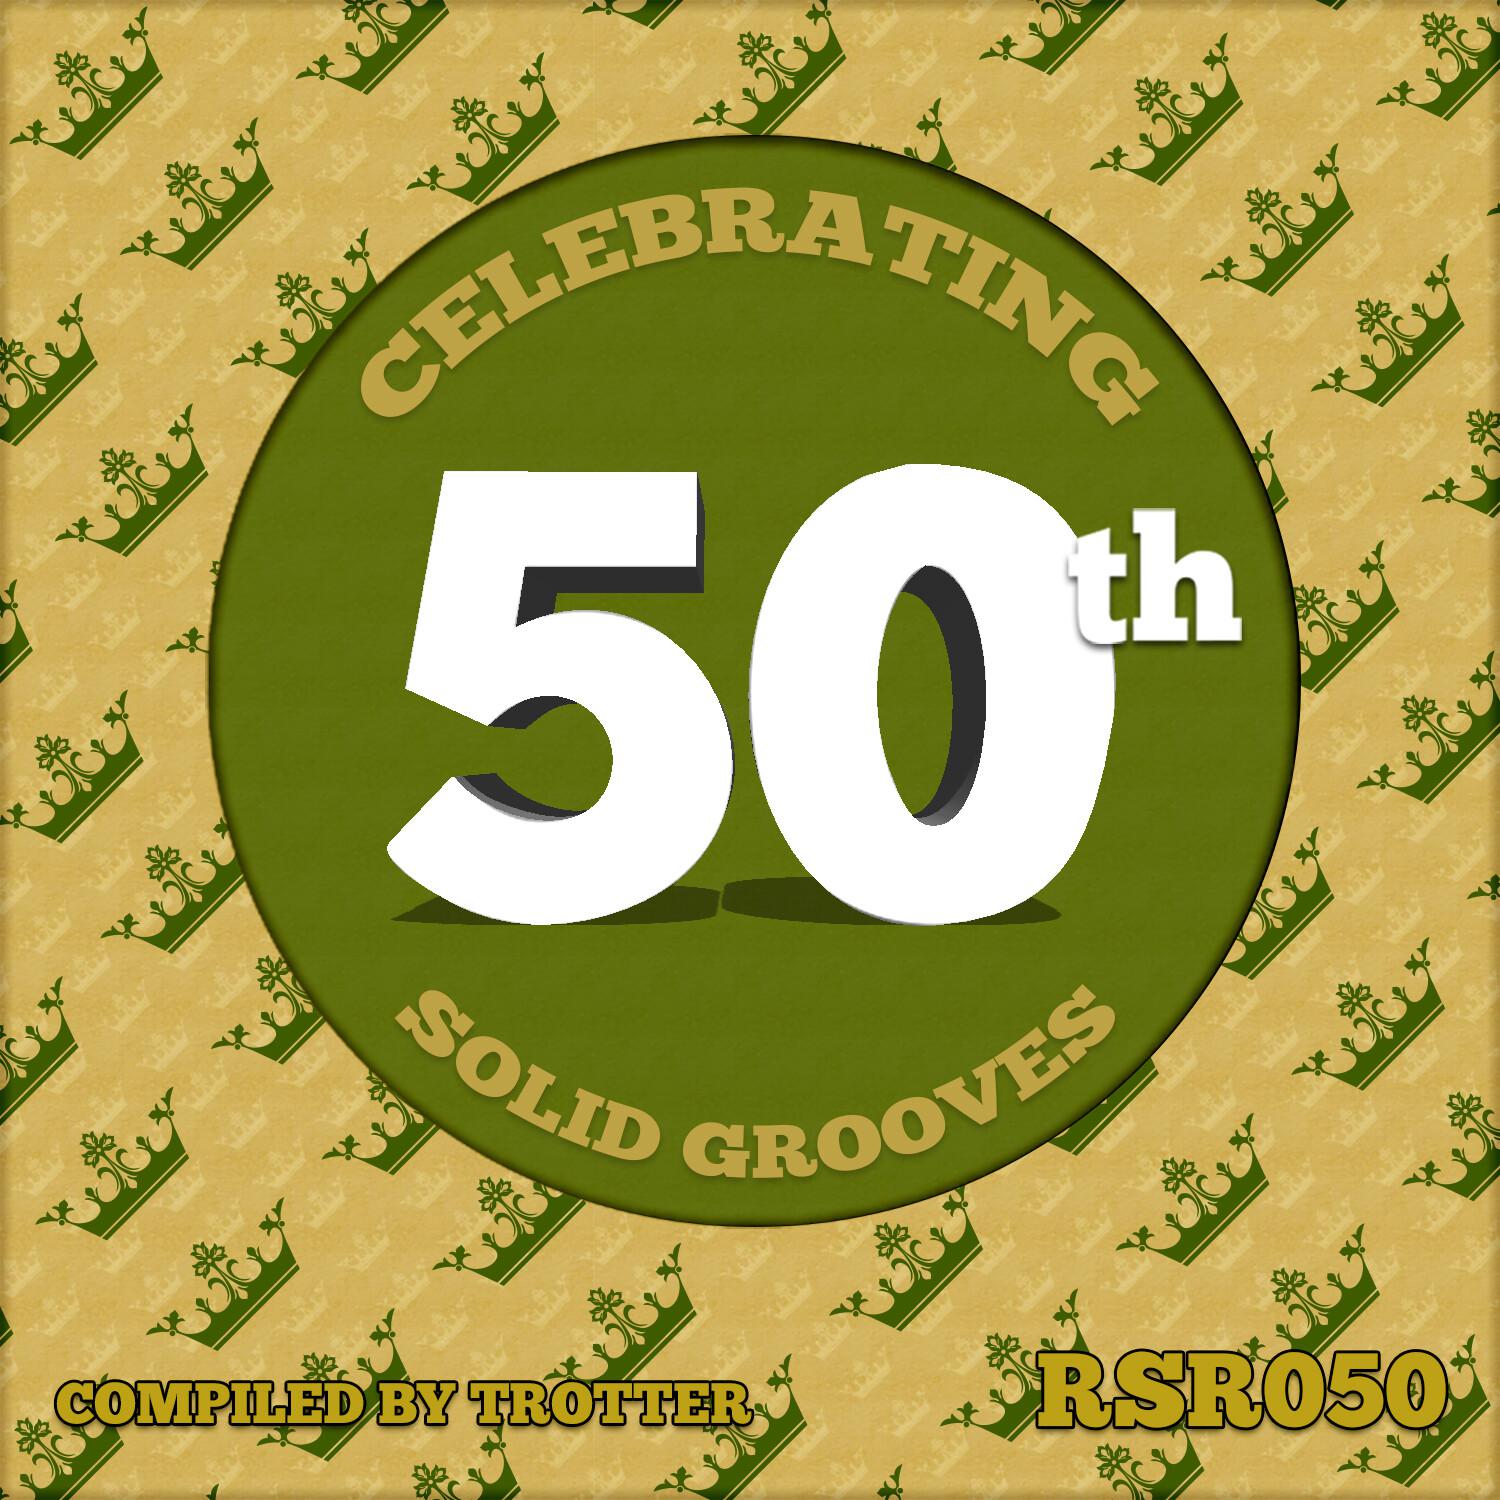 Celebrating 50th Solid Grooves - Compiled by Trotter